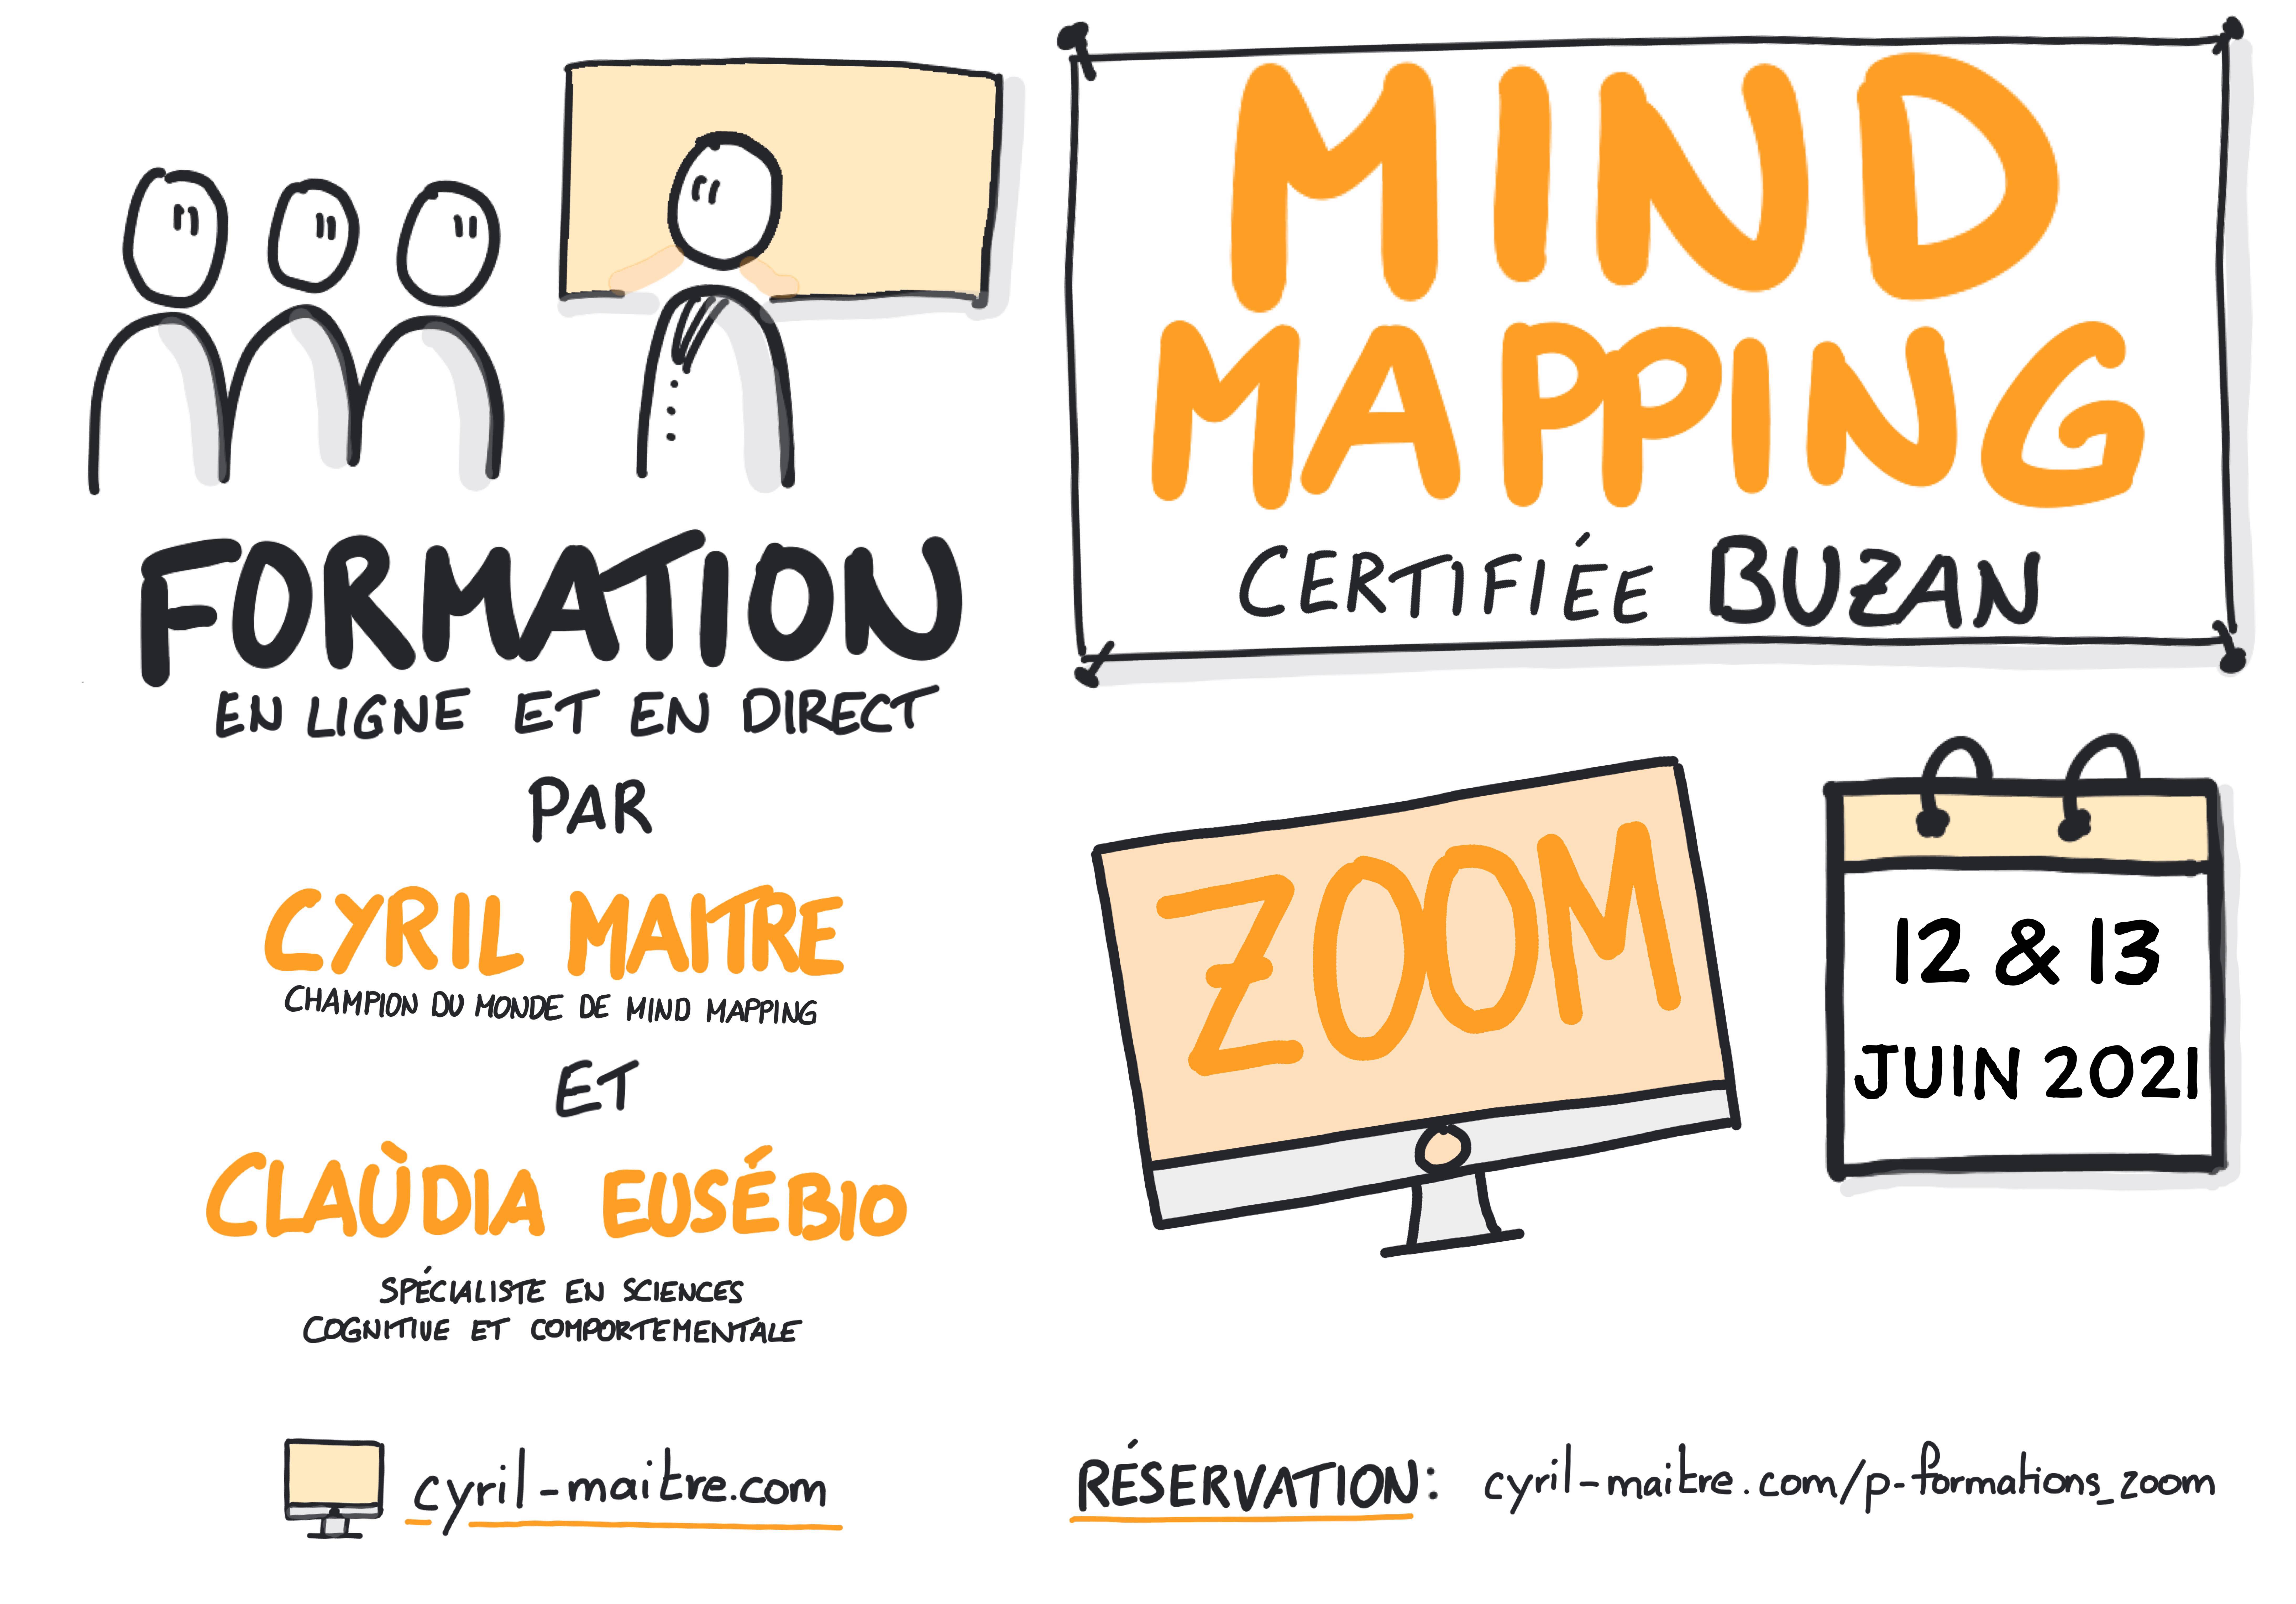 cyril maitre claudia eusebio formation mind mapping